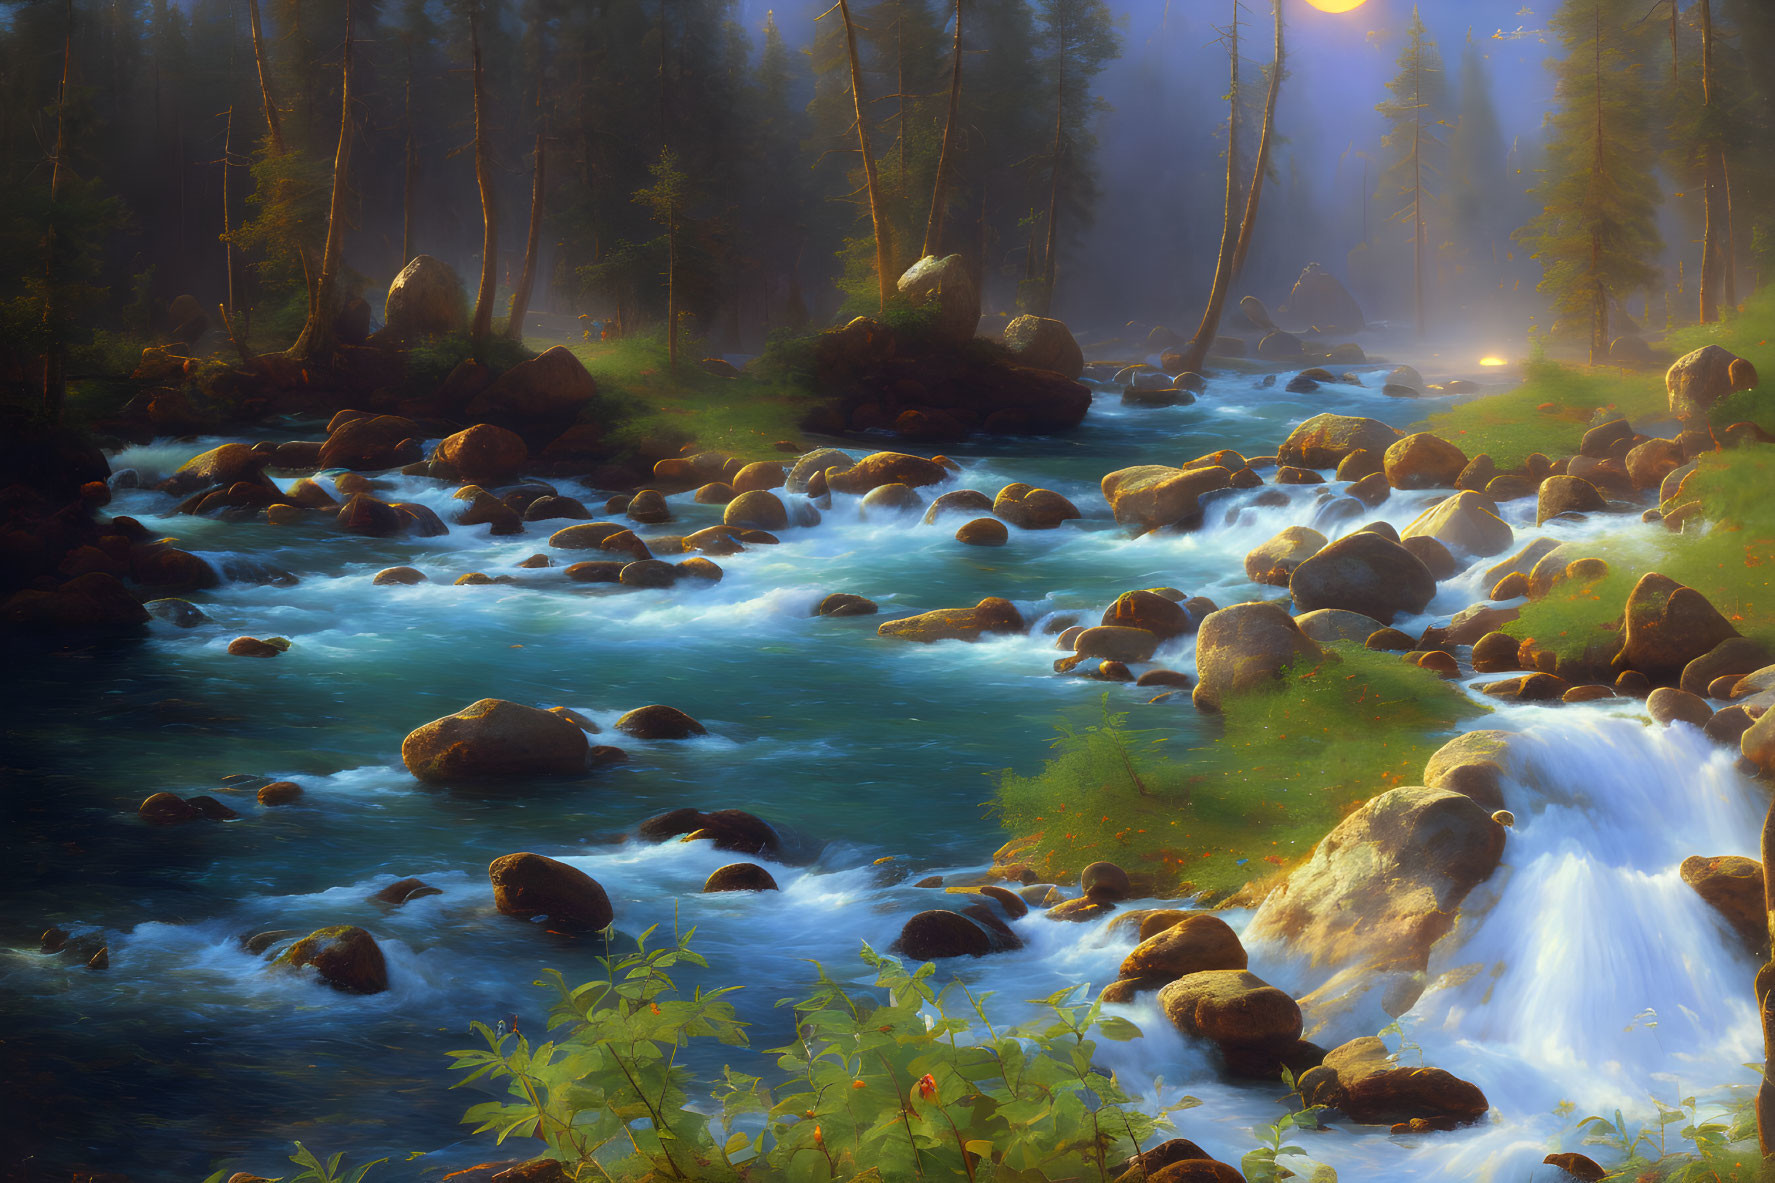 Tranquil forest landscape with sunlit river and boulders